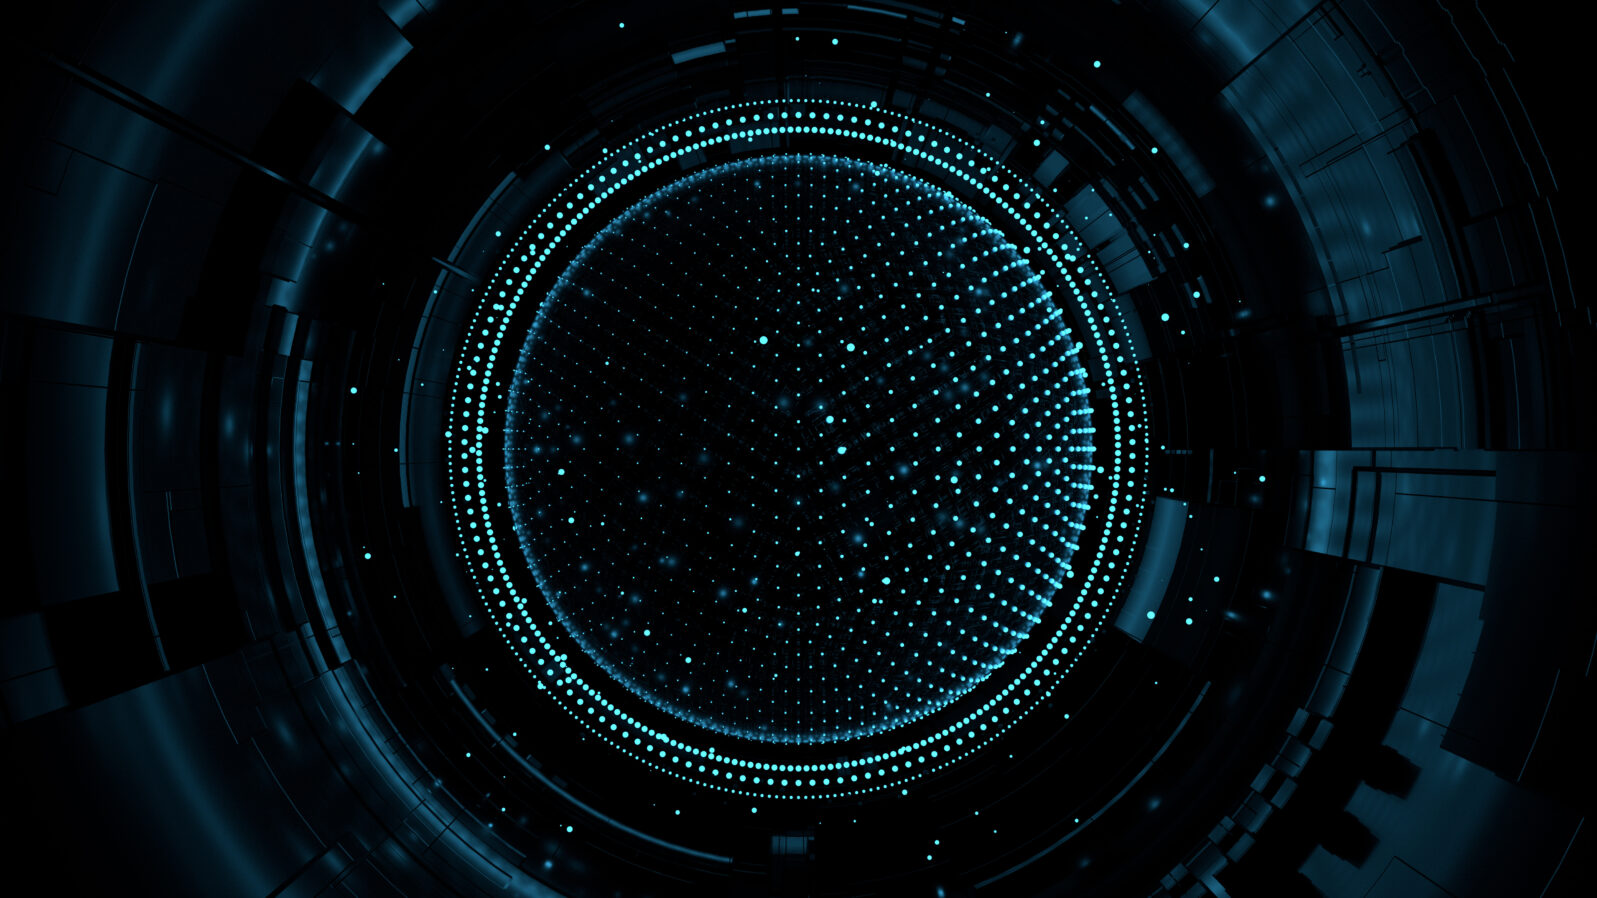 3d illustration futuristic background with large sphere and neon dots